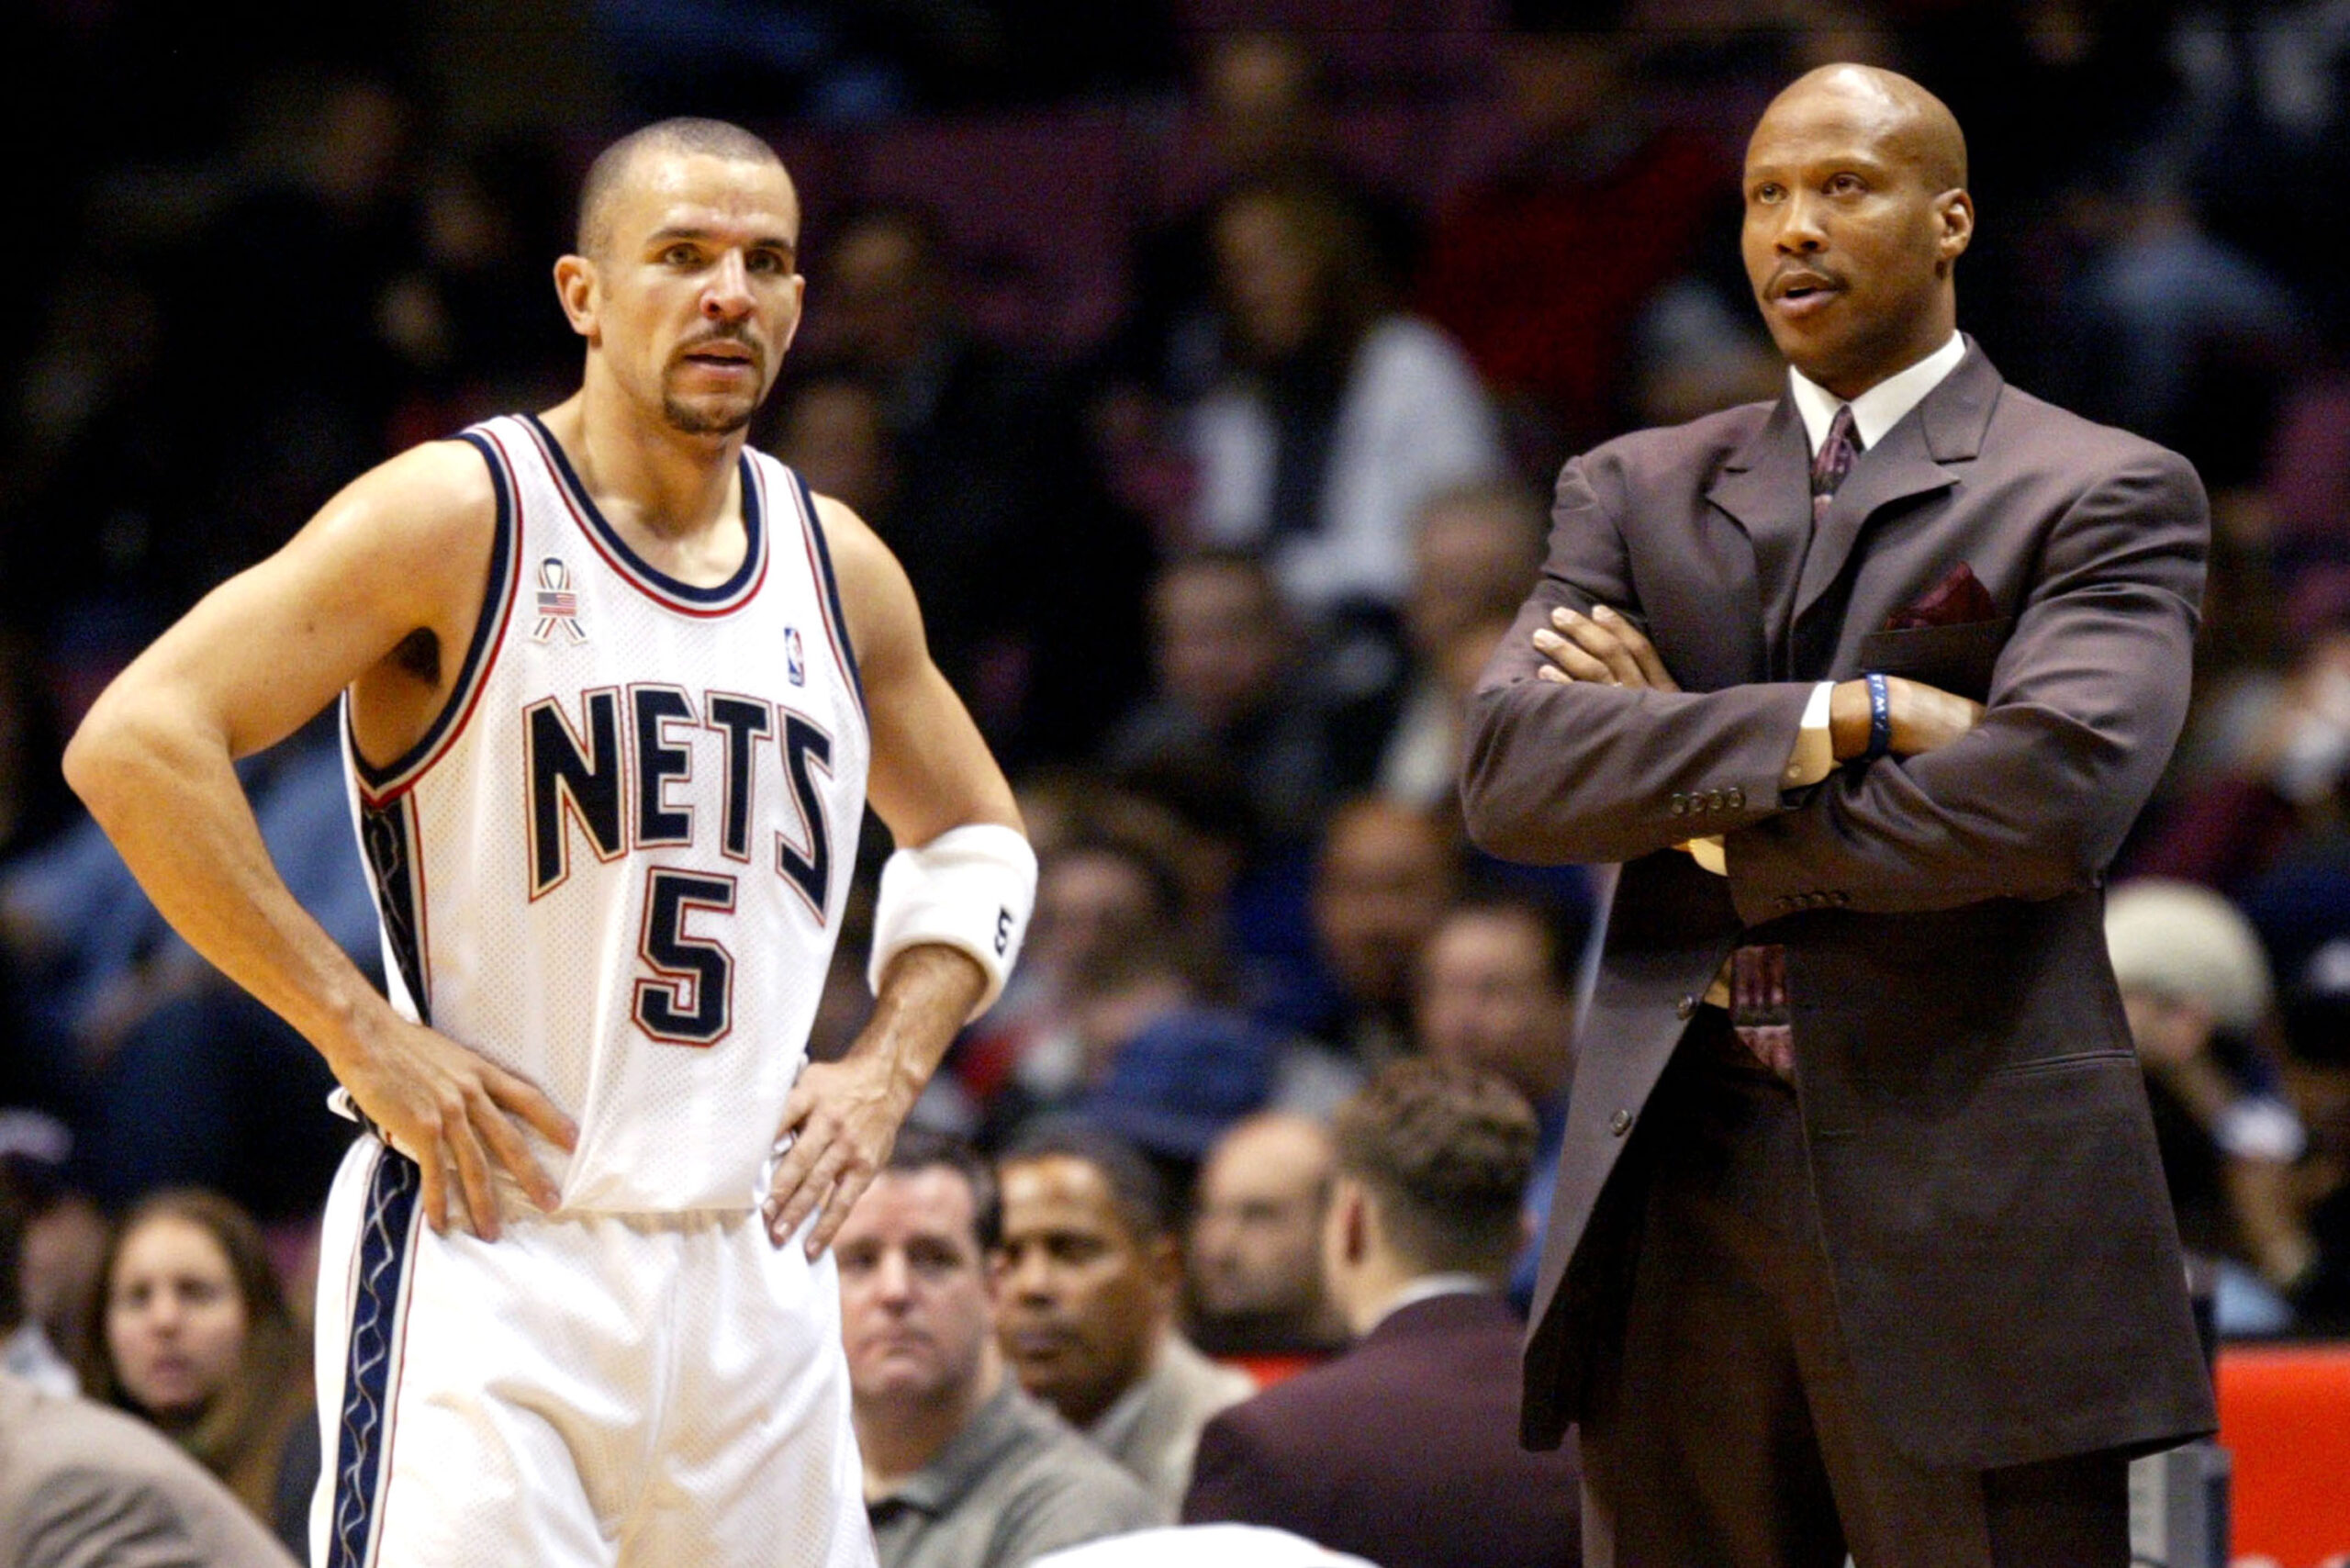 JASON KIDD'S HALL OF FAME INDUCTION MAKES FORMER NETS COACH, BYRON SCOTT  “EXTREMELY HAPPY” – Brandon Scoop B Robinson Official Website